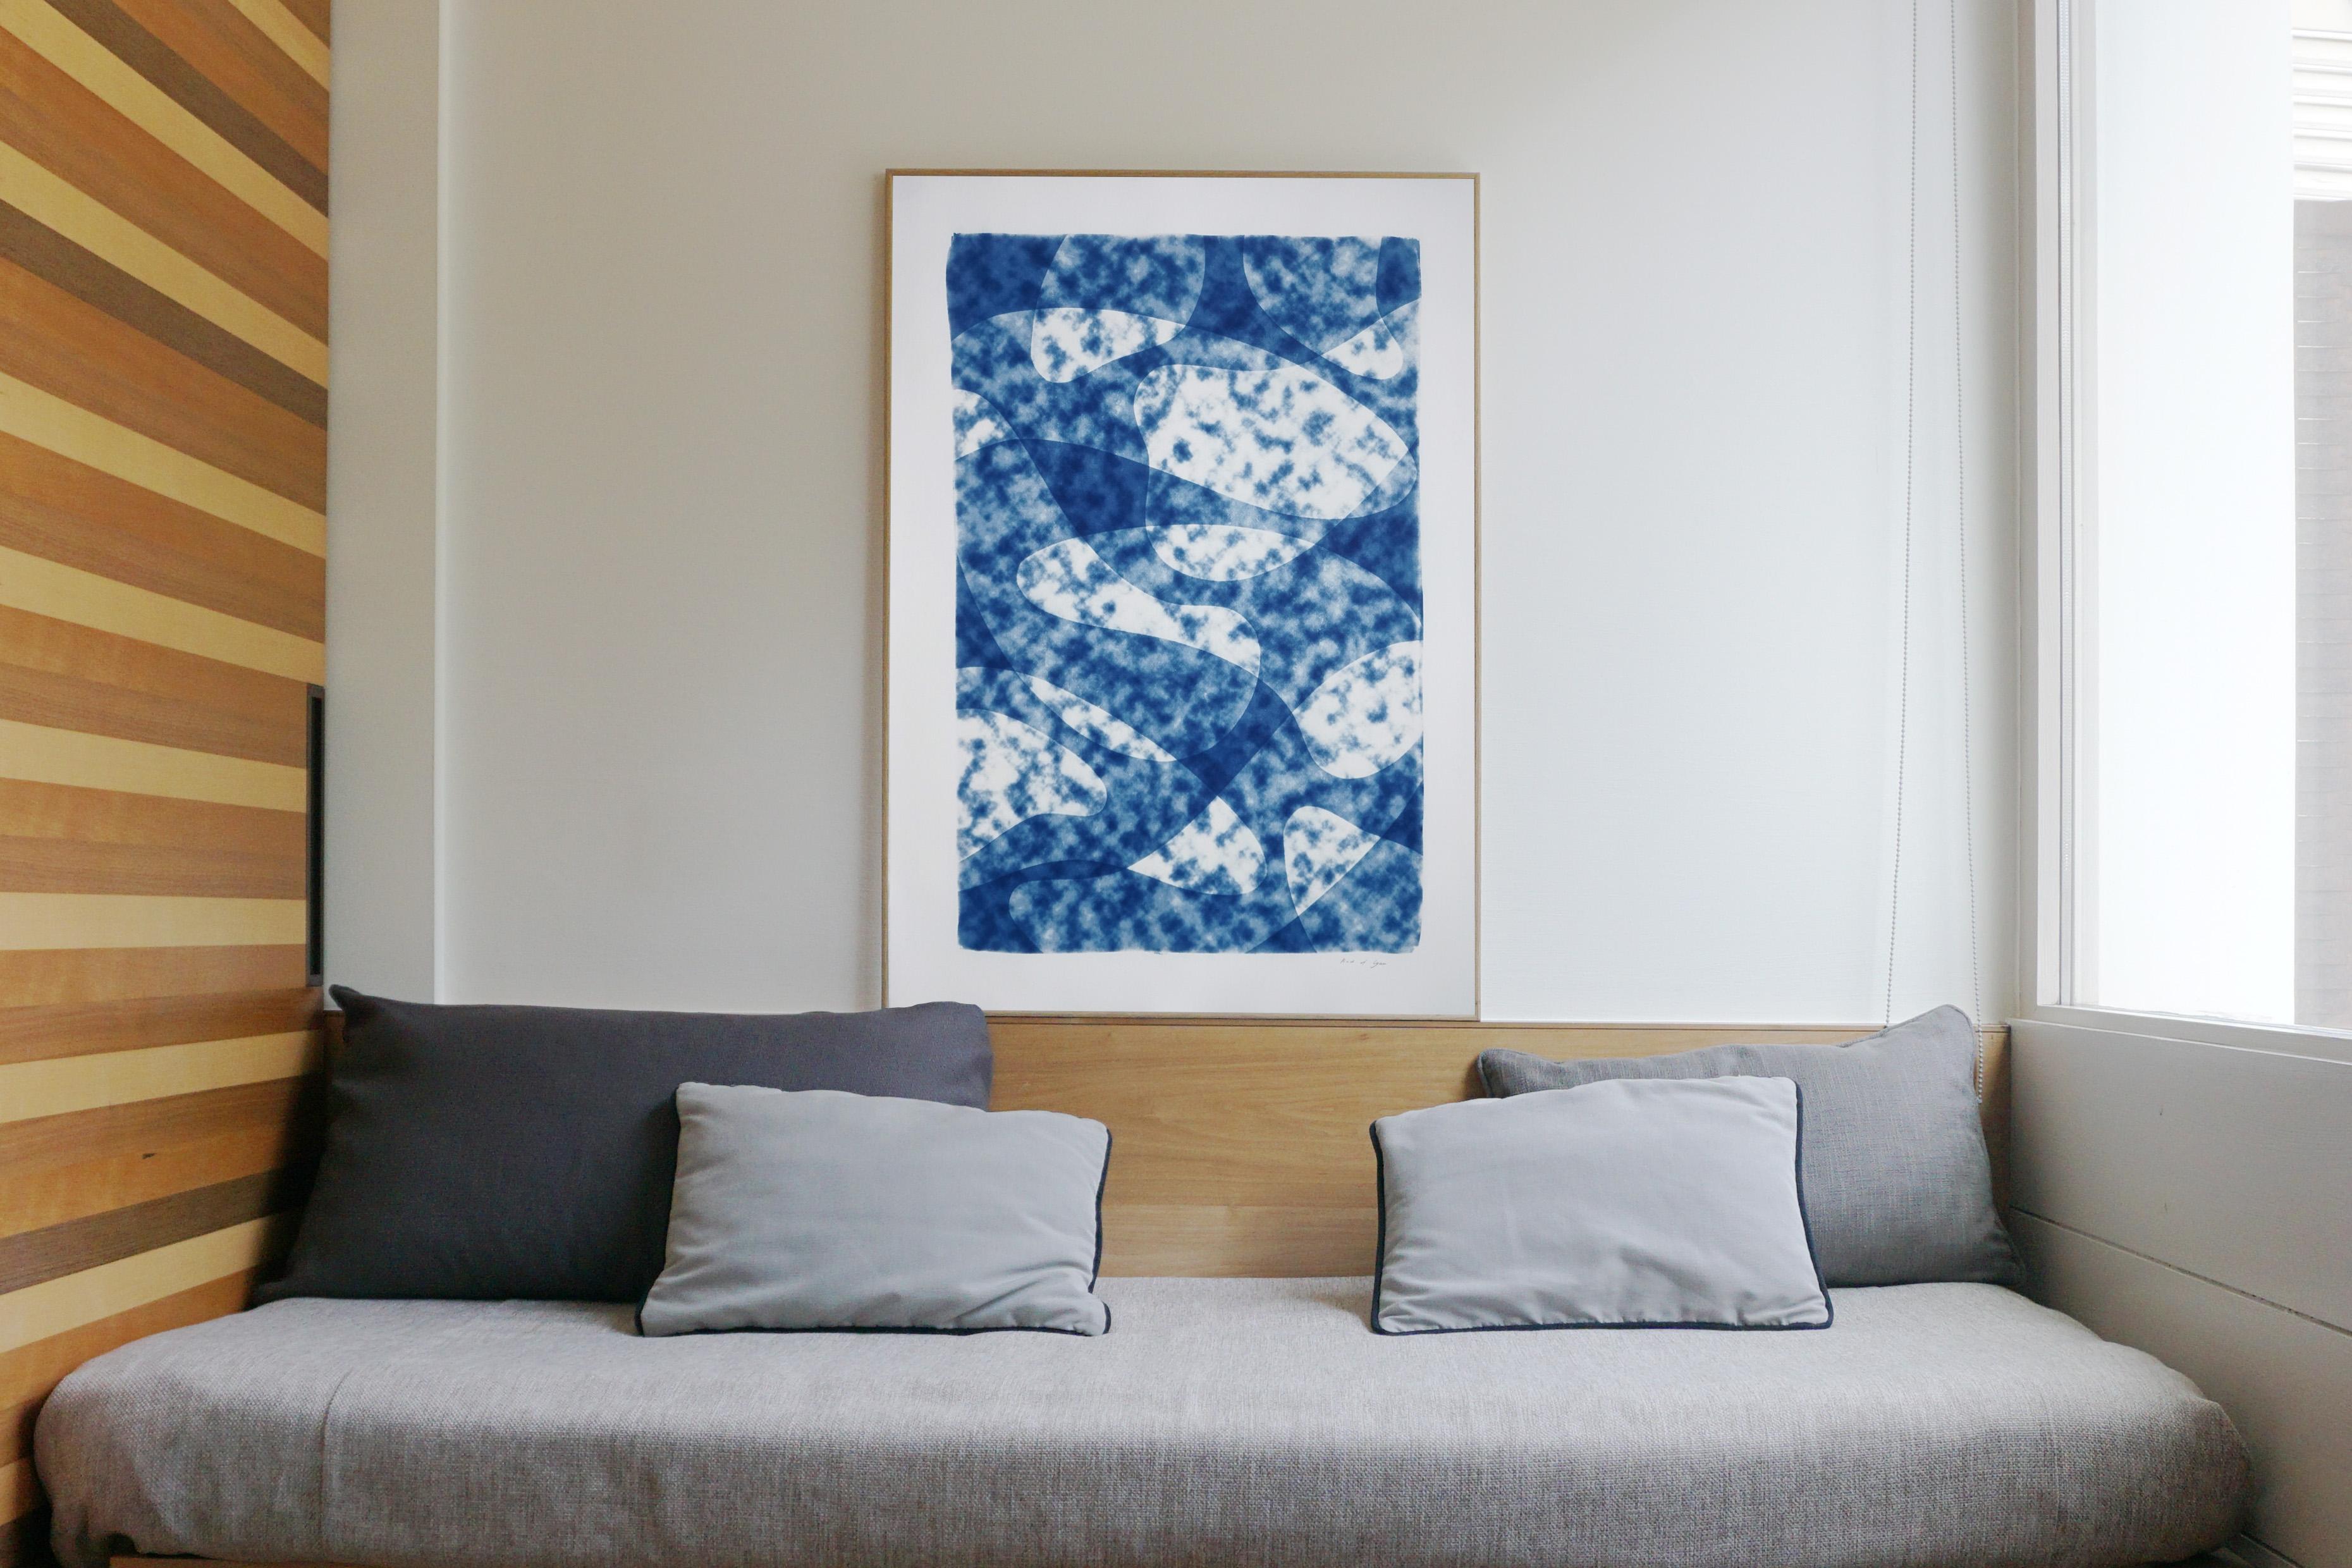 Looking Up at The Clouds, Unique Monotype in Blue Tones, Avant-Garde Shapes  - Modern Print by Kind of Cyan